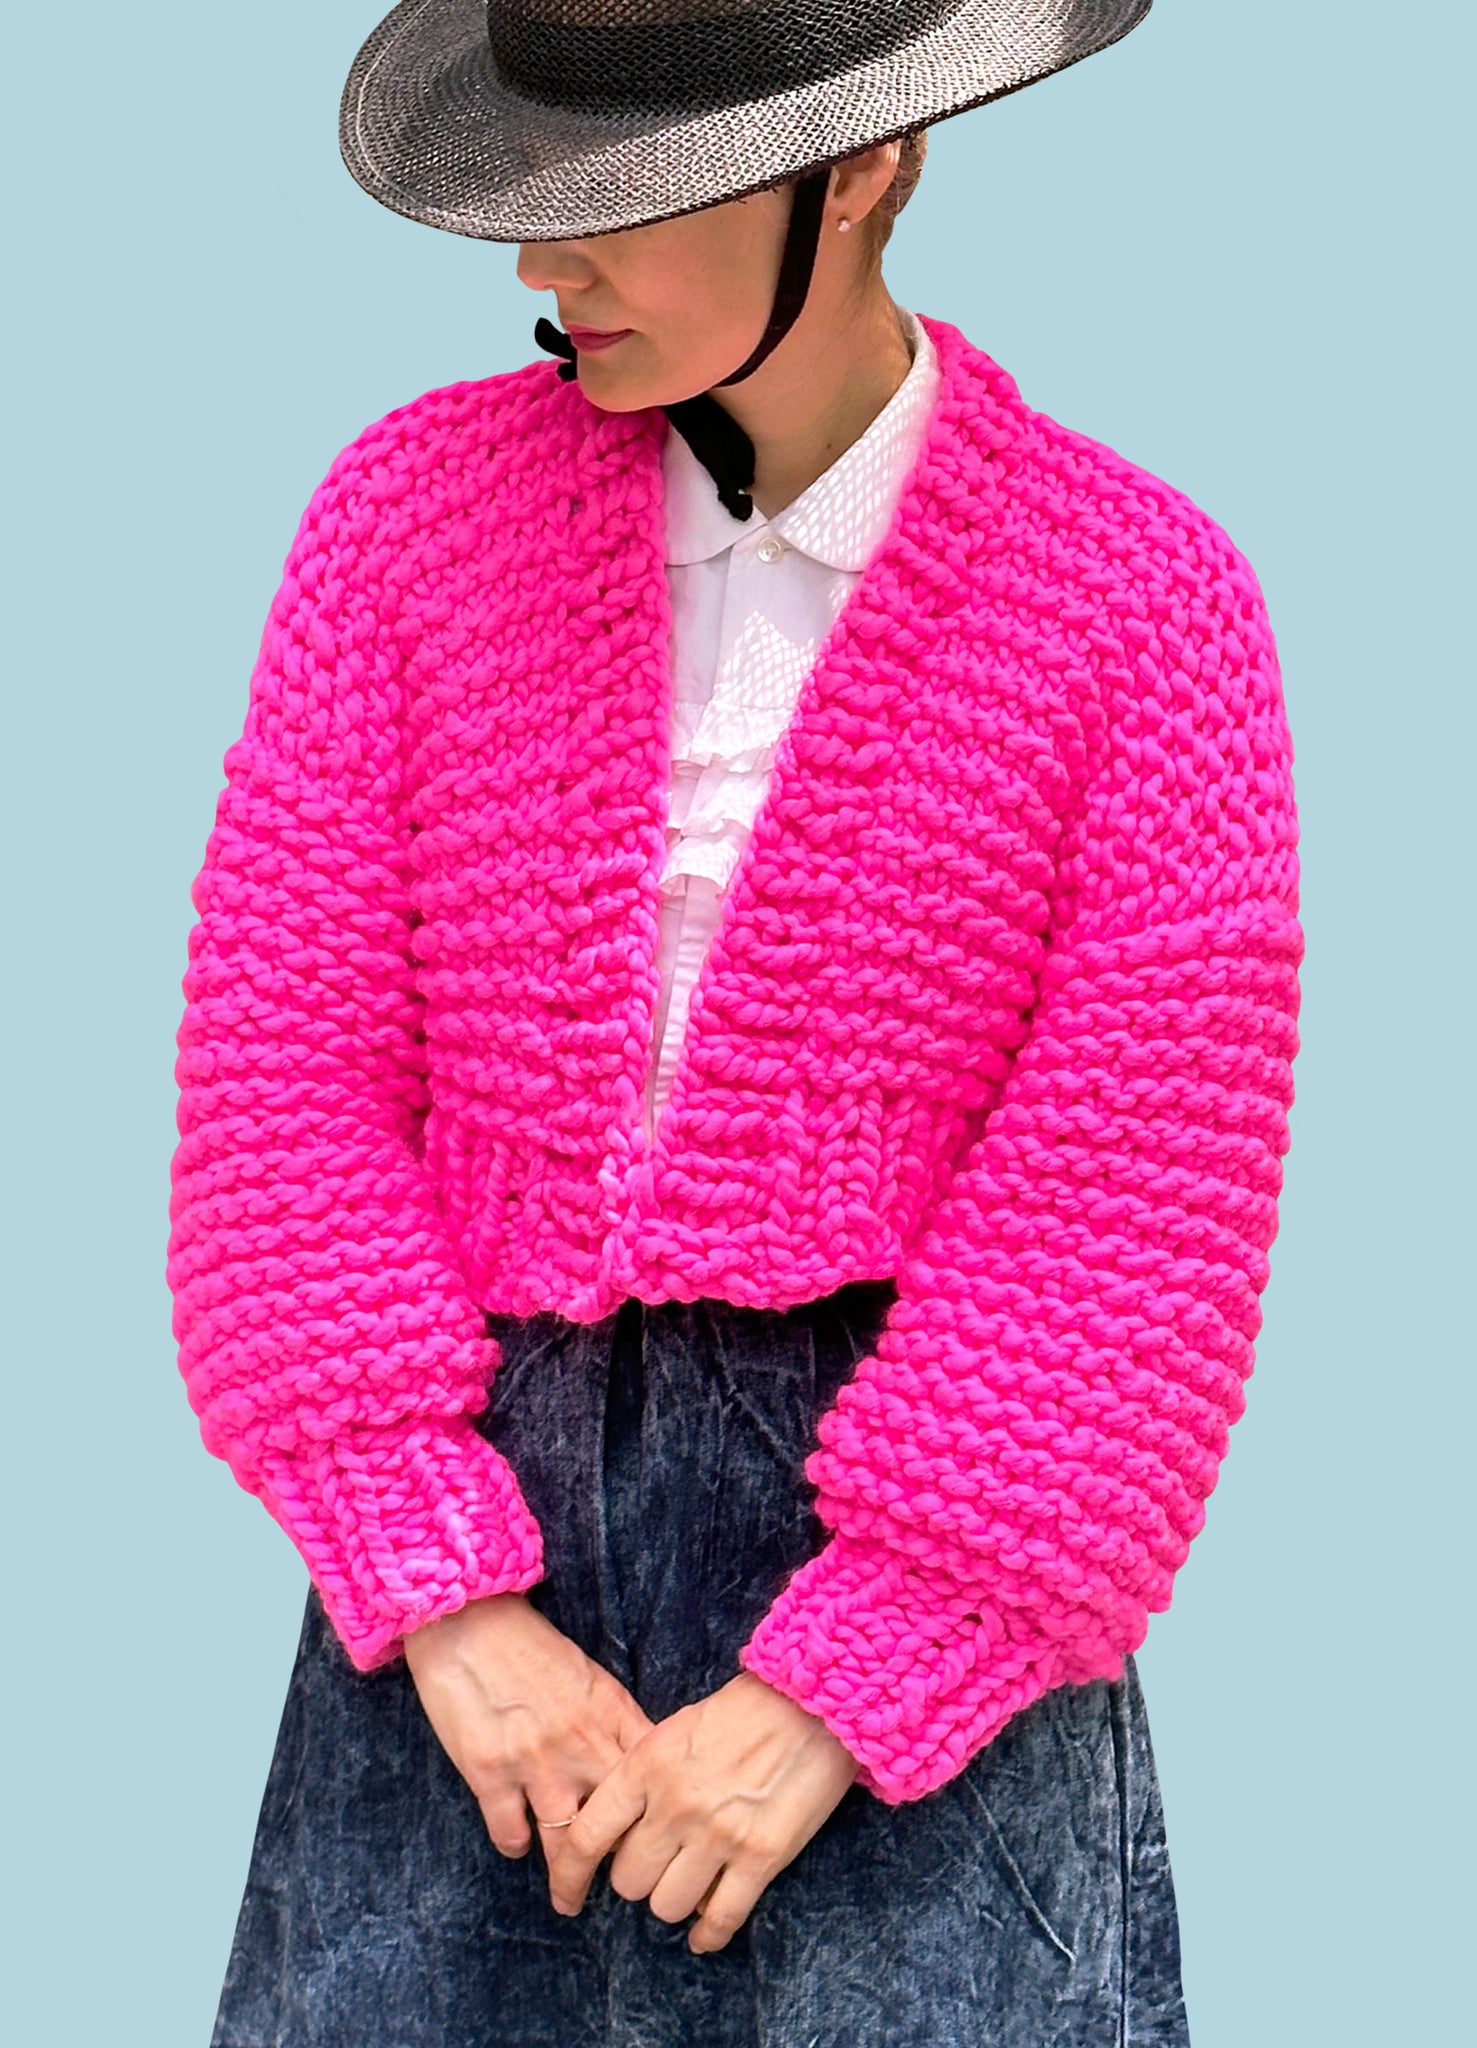 – Digital Mango Free your Download Knit pattern: Loopy sweater | knitting first